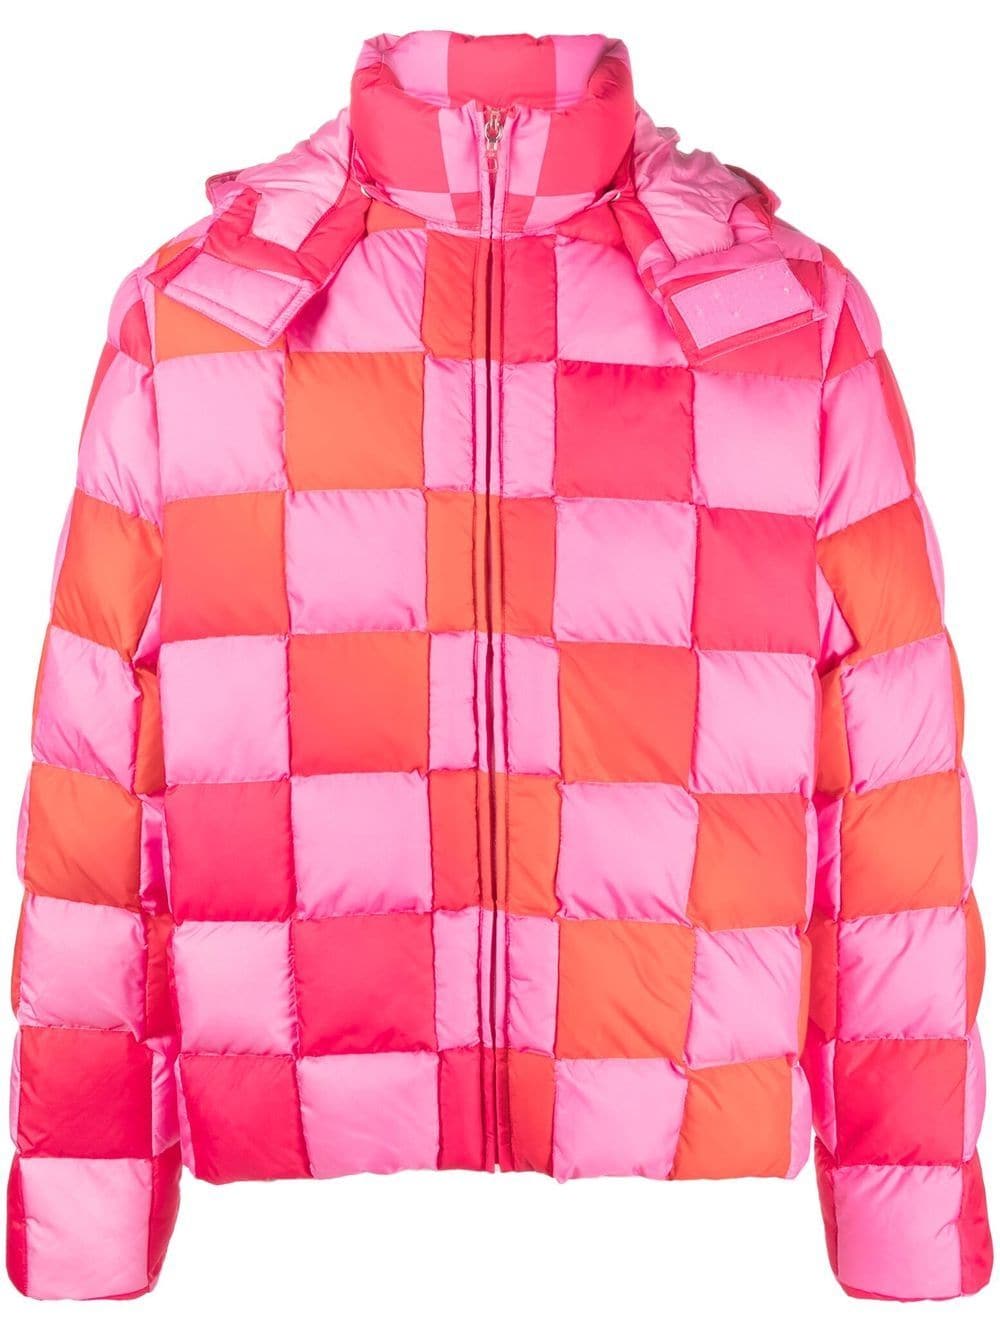 Dior Dior by ERL Down Jacket 313C418A5704_C383 Pink / 48